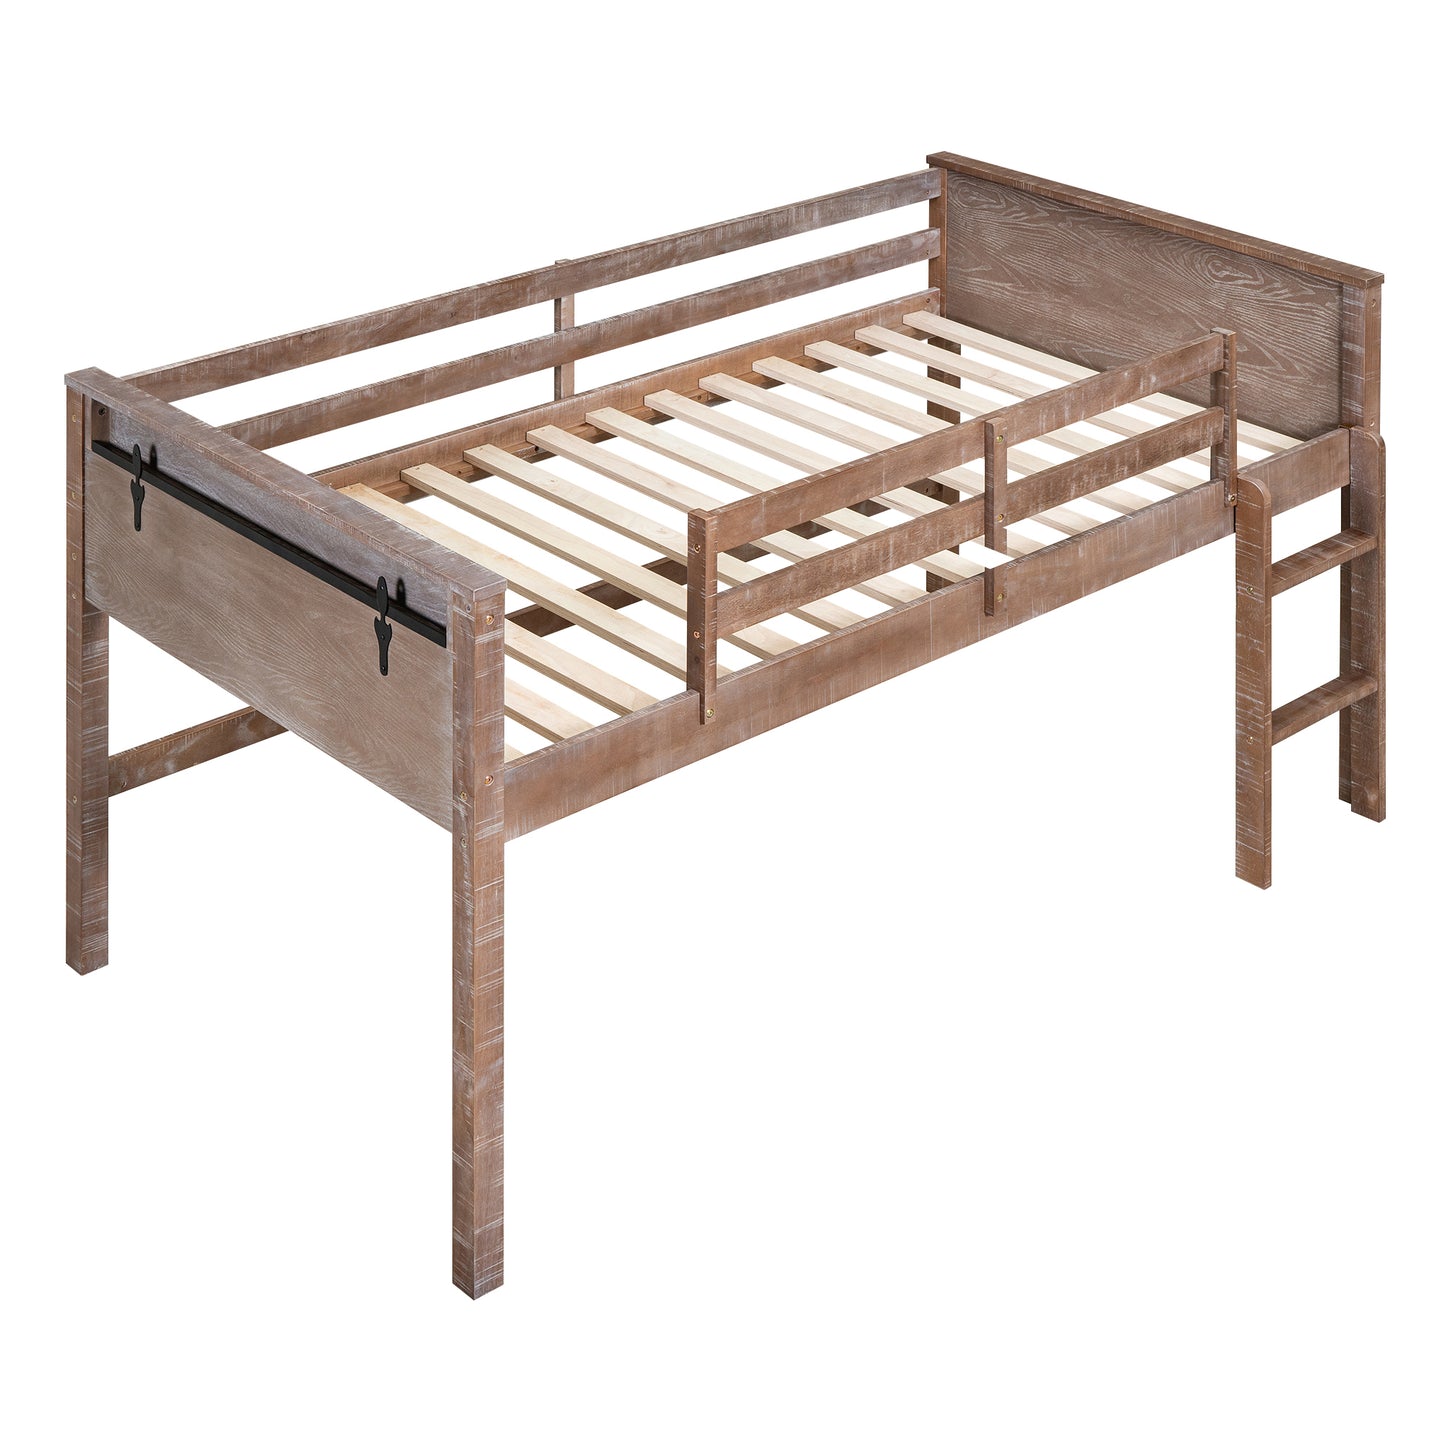 Wood Full Size Loft Bed with Hanging Clothes Racks, White Rustic Natural